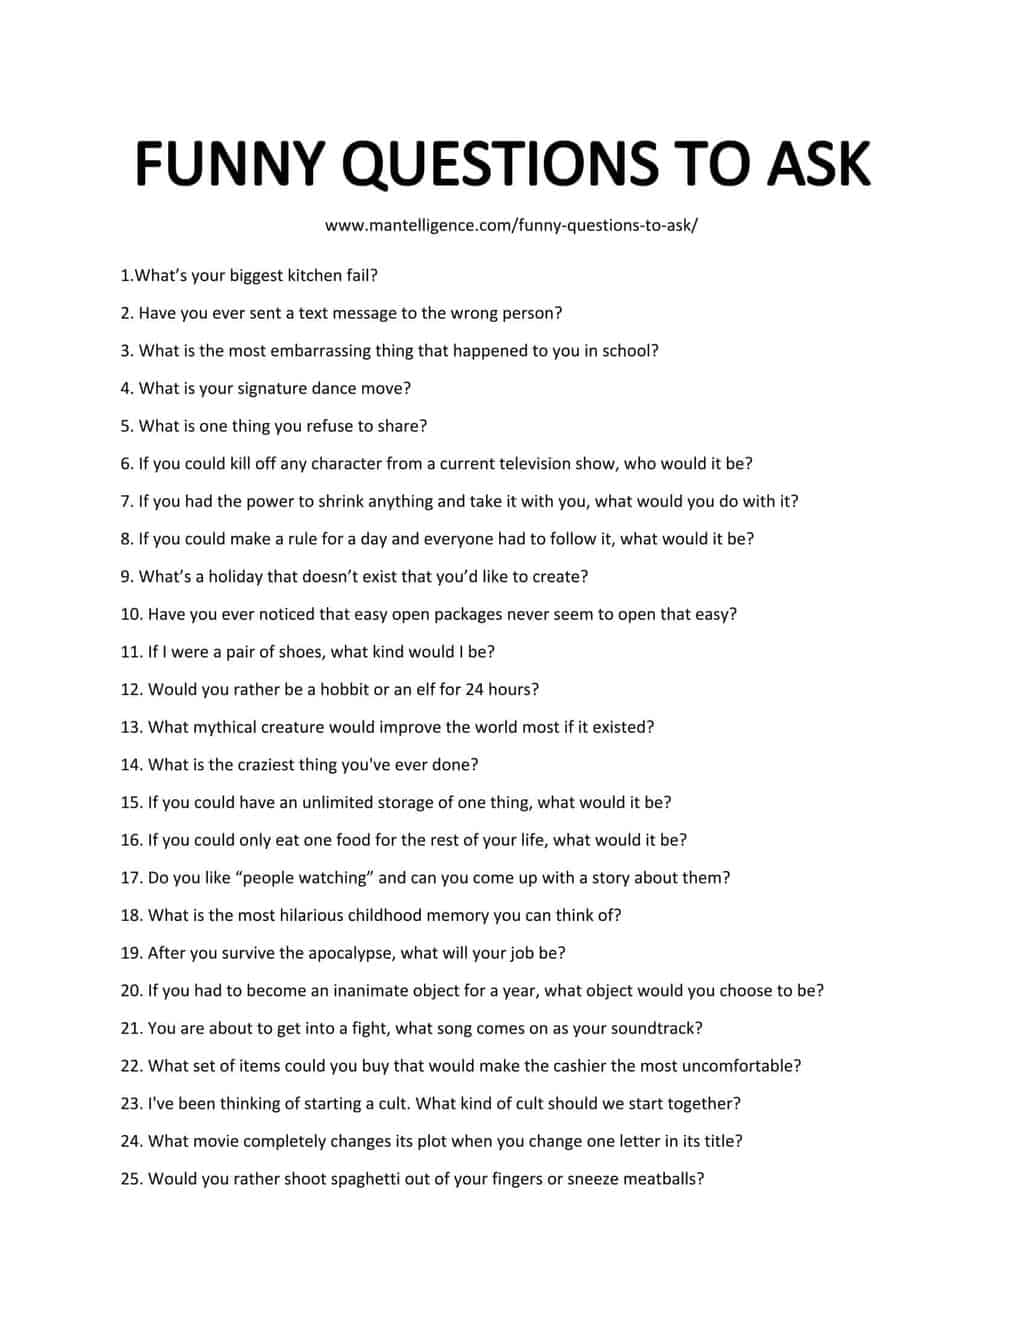 115 Funny Questions to Ask - Ways to Make Her Laugh Through Humor